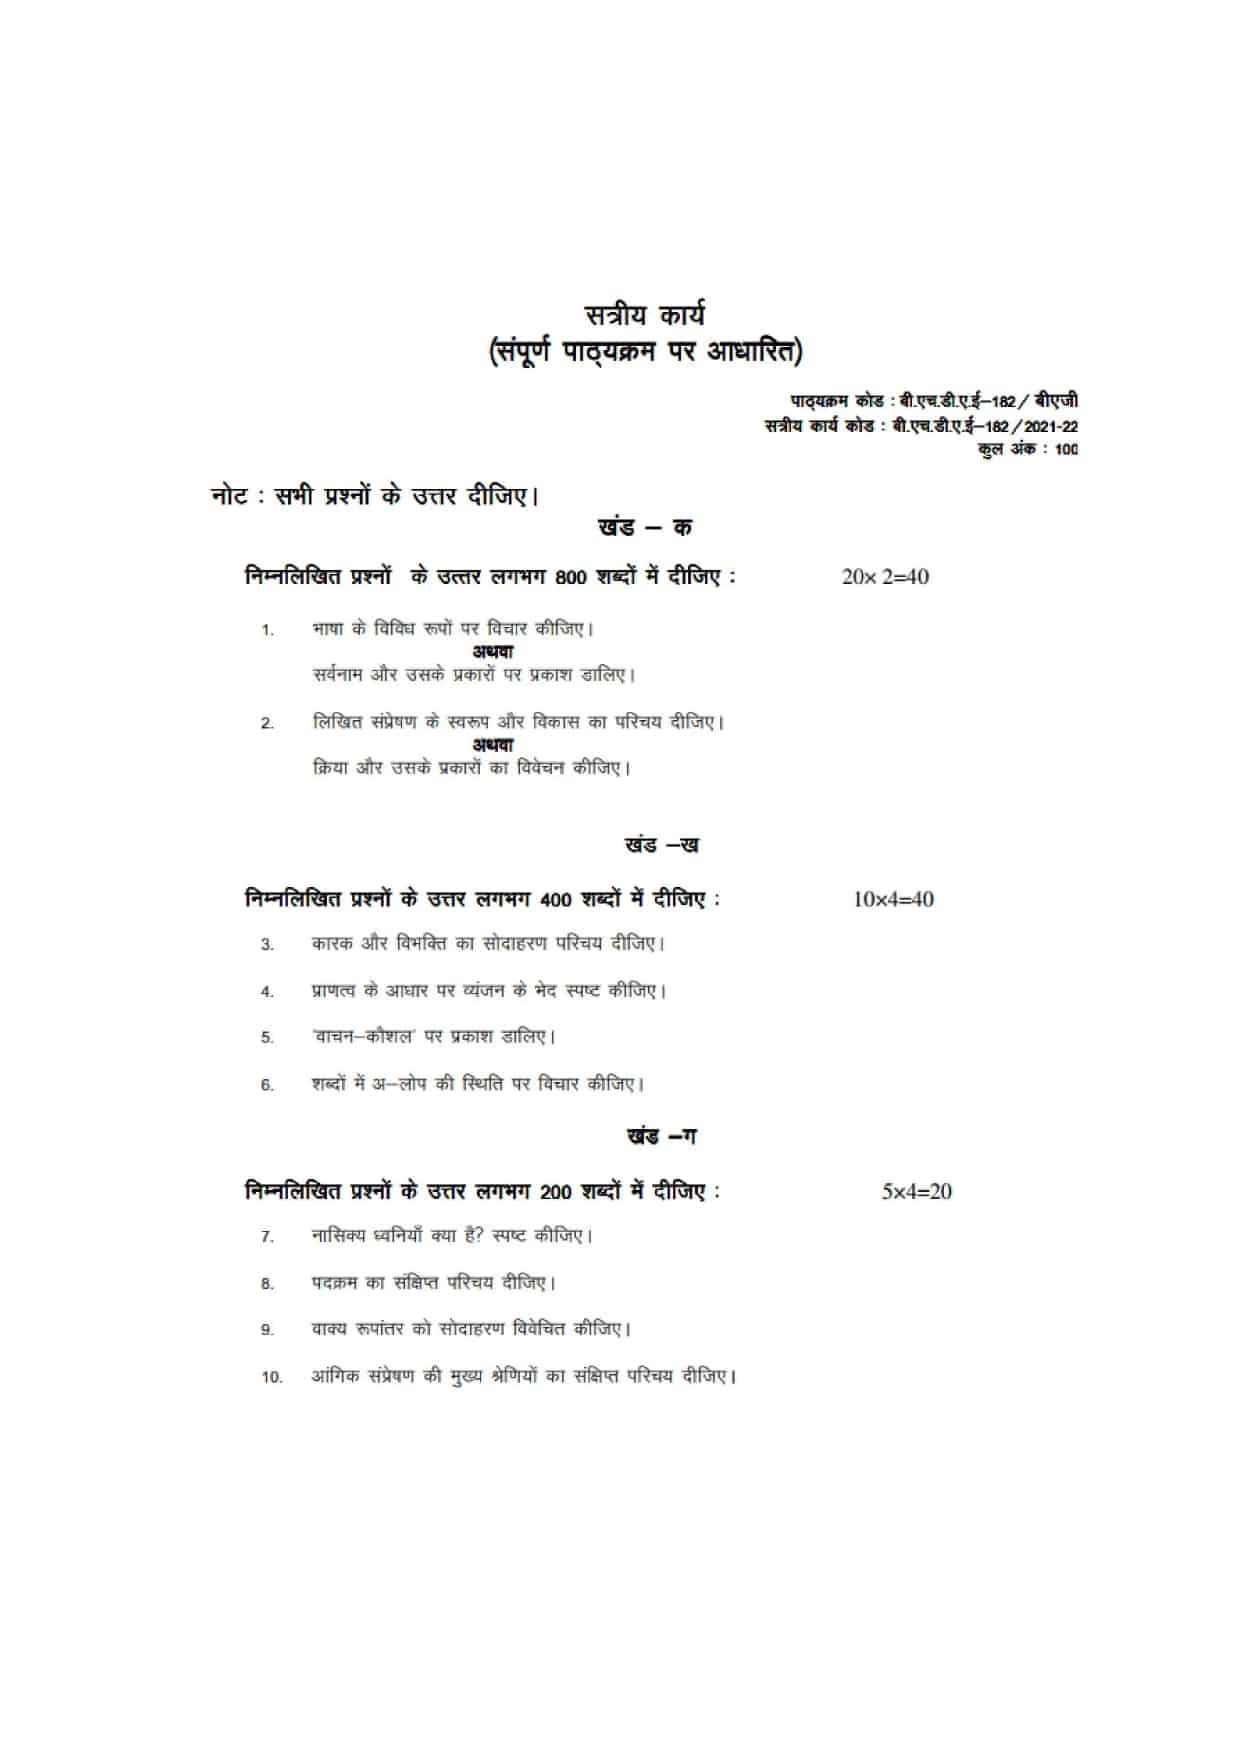 IGNOU BHDAE 182 HINDI SOLVED ASSIGNMENT 2021-22